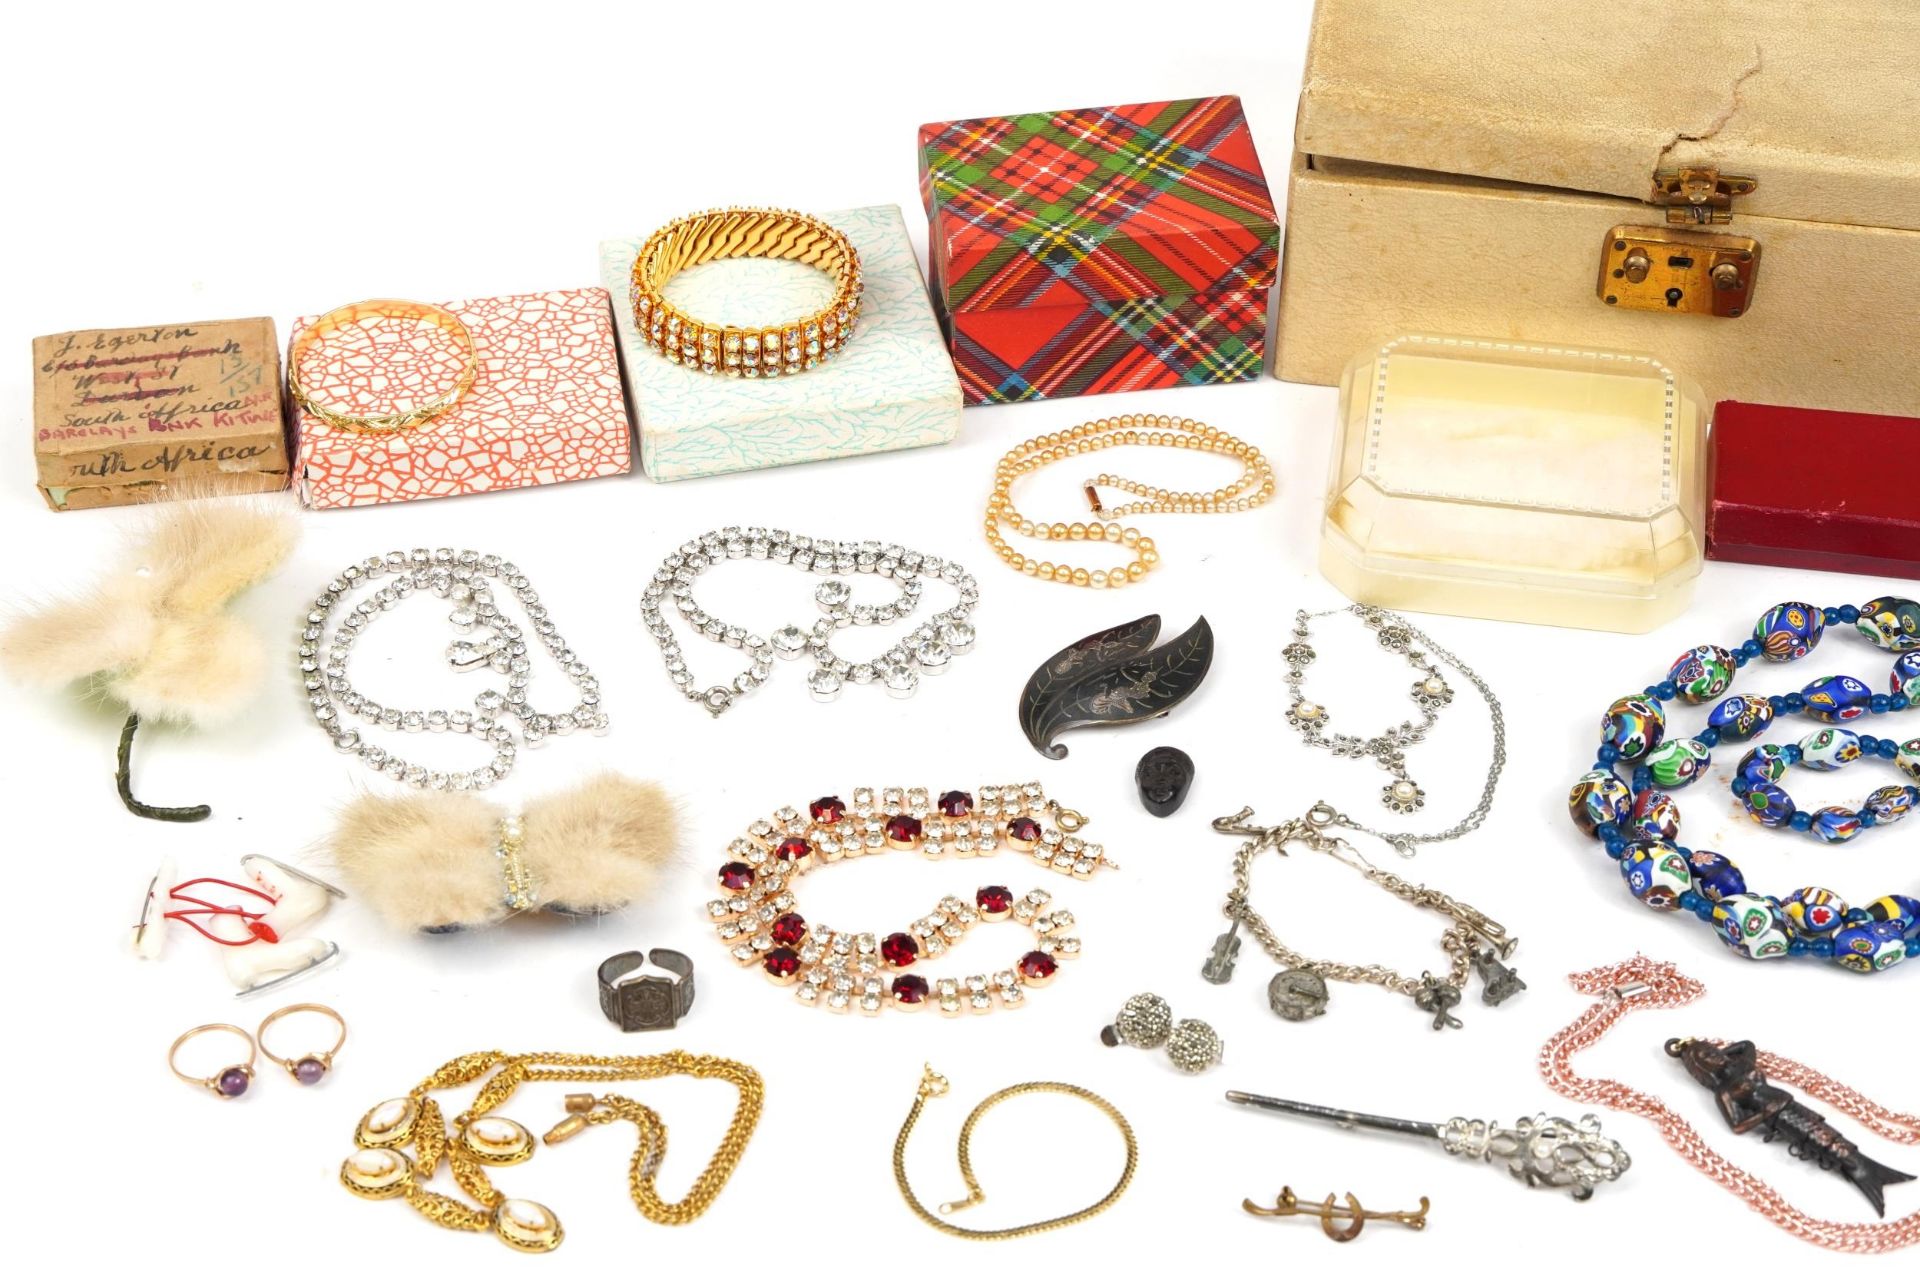 Vintage and later costume jewellery including bracelets, cufflinks, brooches and a simulated pearl - Image 2 of 3